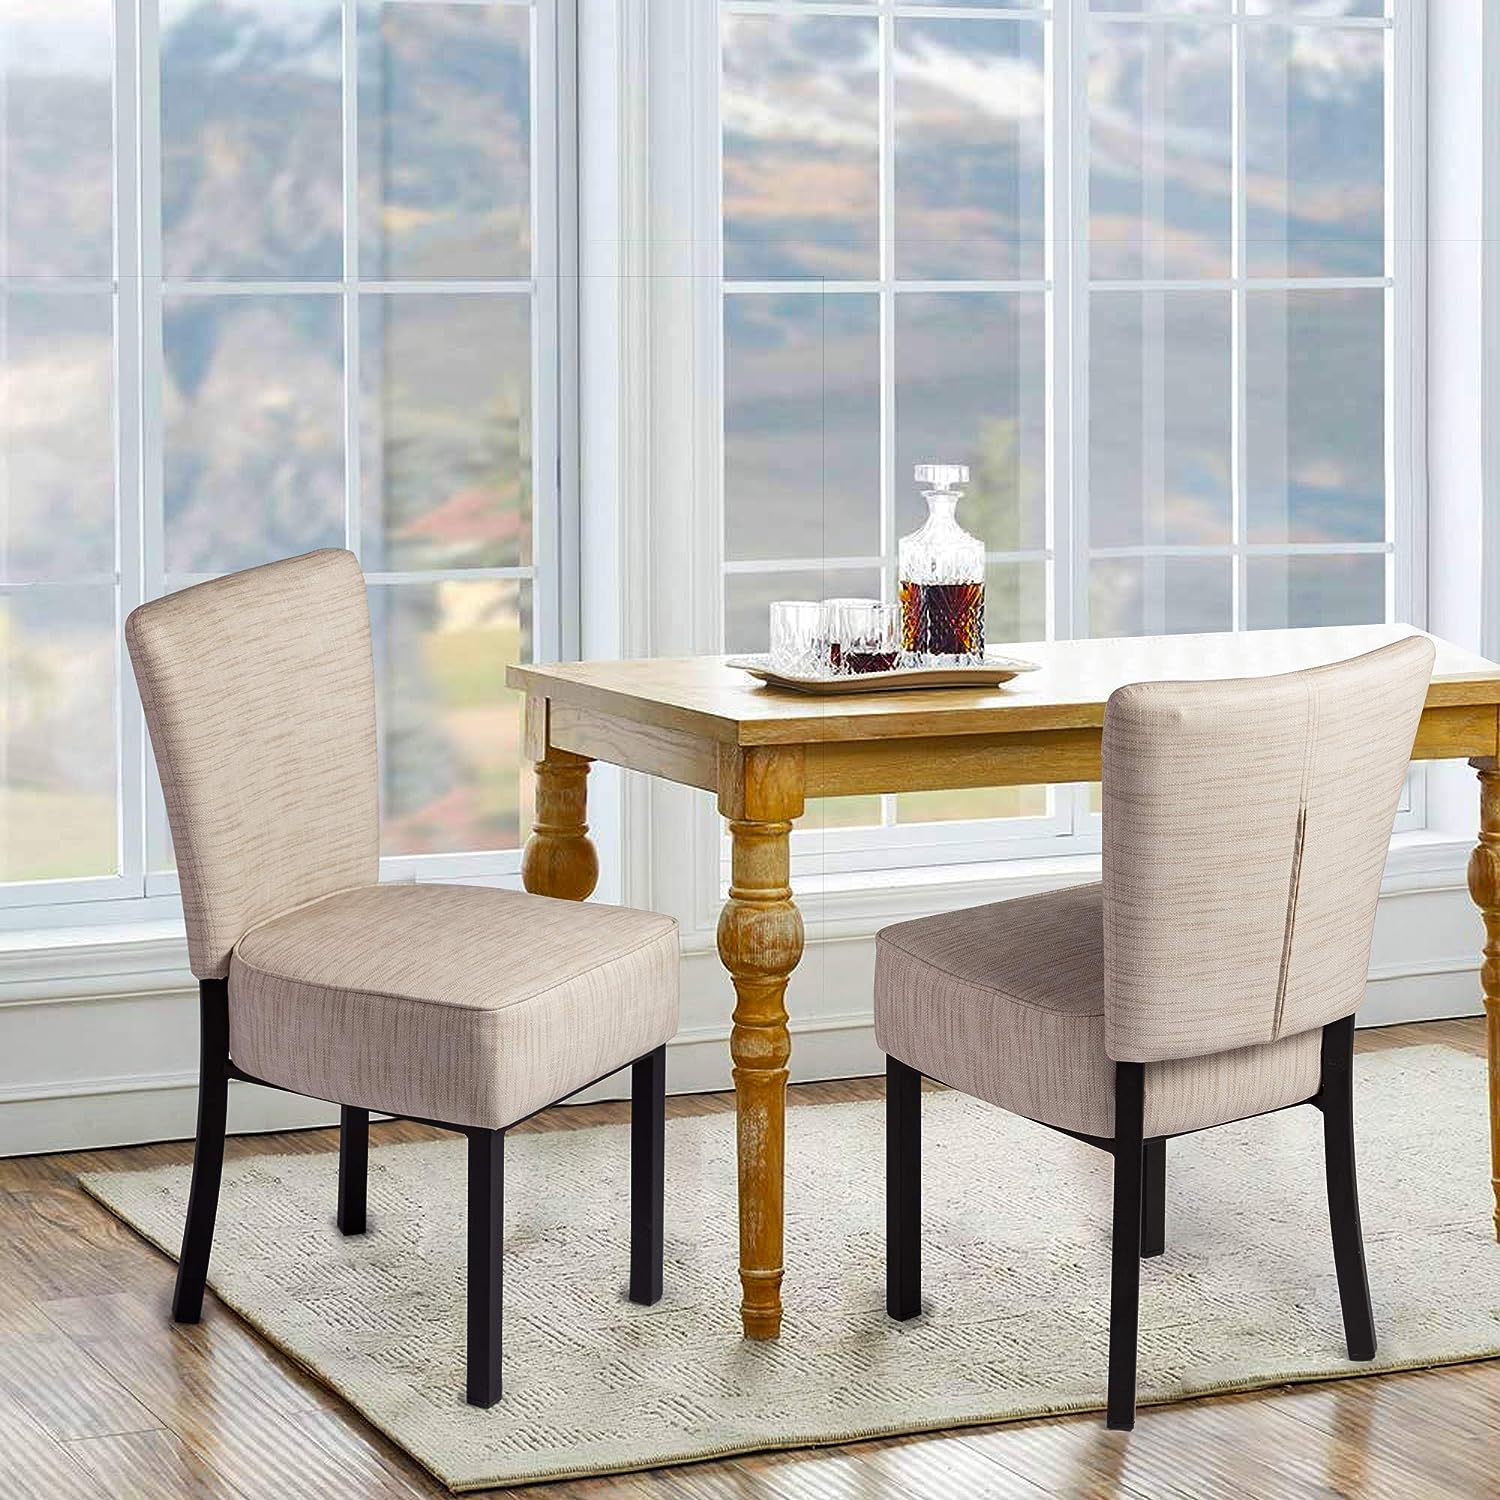 LUCKYERMORE Set of 2 Upholstered Dining Chairs PU Leather Modern Dining Room Chairs, Cream